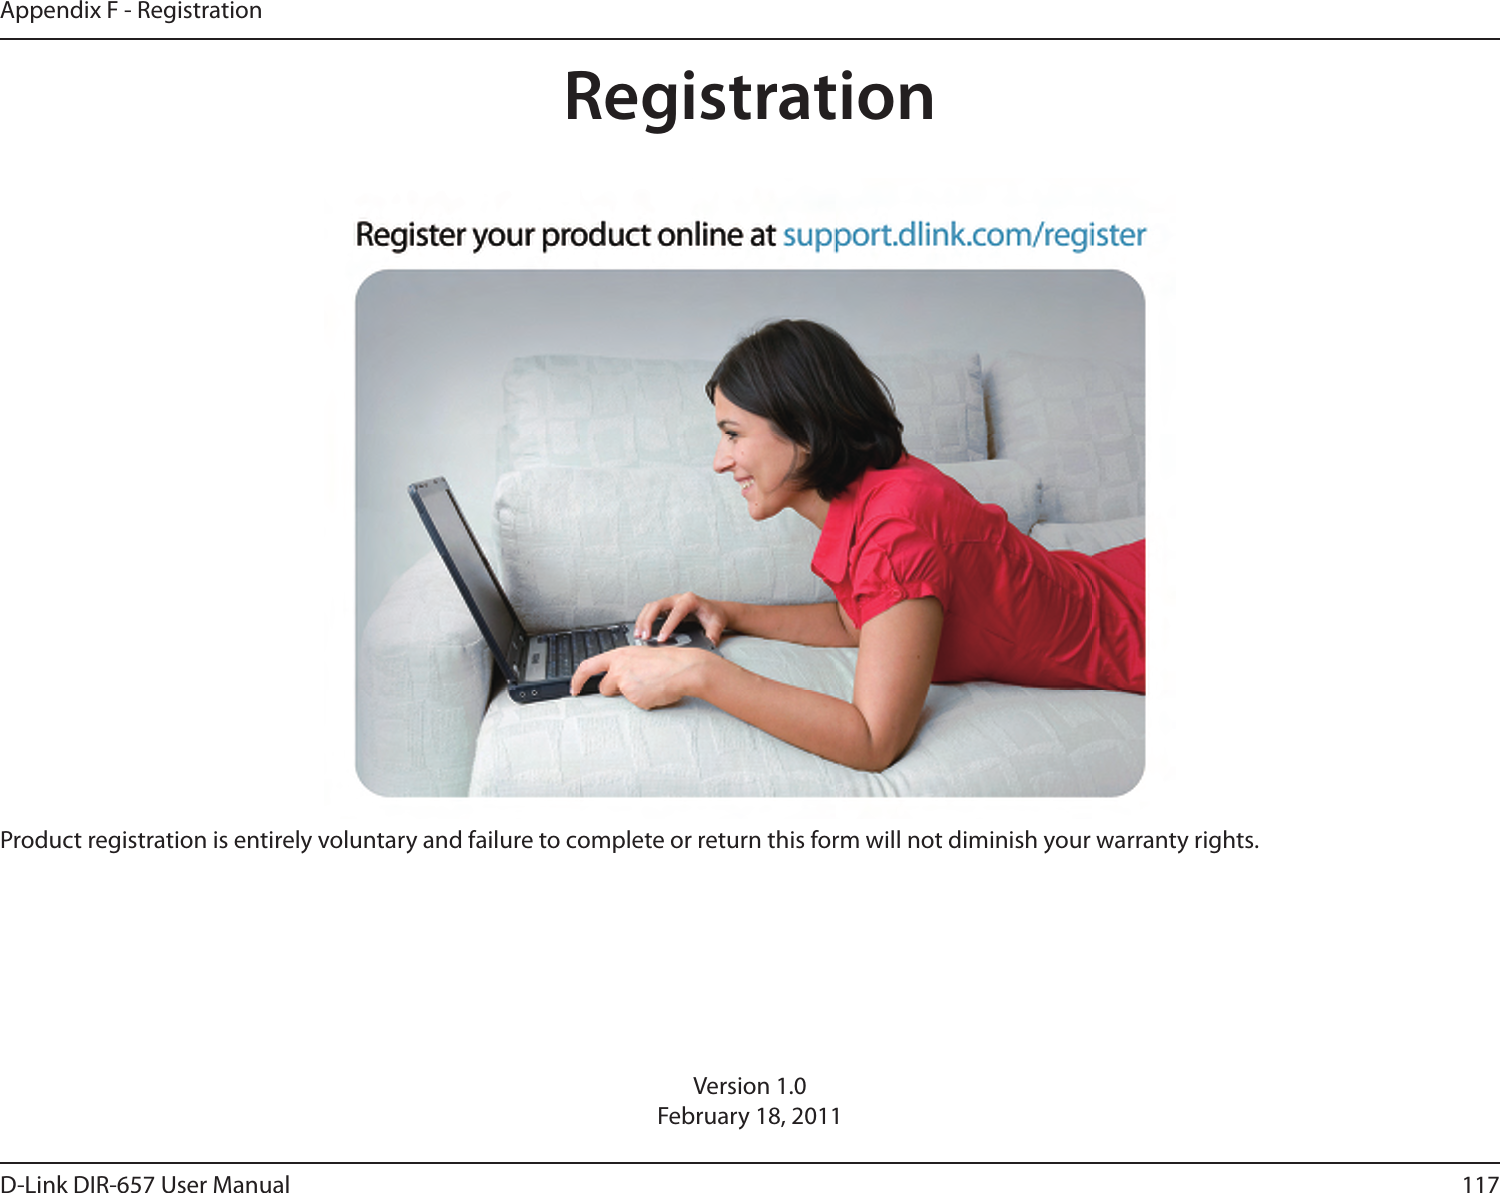 117D-Link DIR-657 User ManualAppendix F - RegistrationVersion 1.0February 18, 2011Product registration is entirely voluntary and failure to complete or return this form will not diminish your warranty rights.Registration